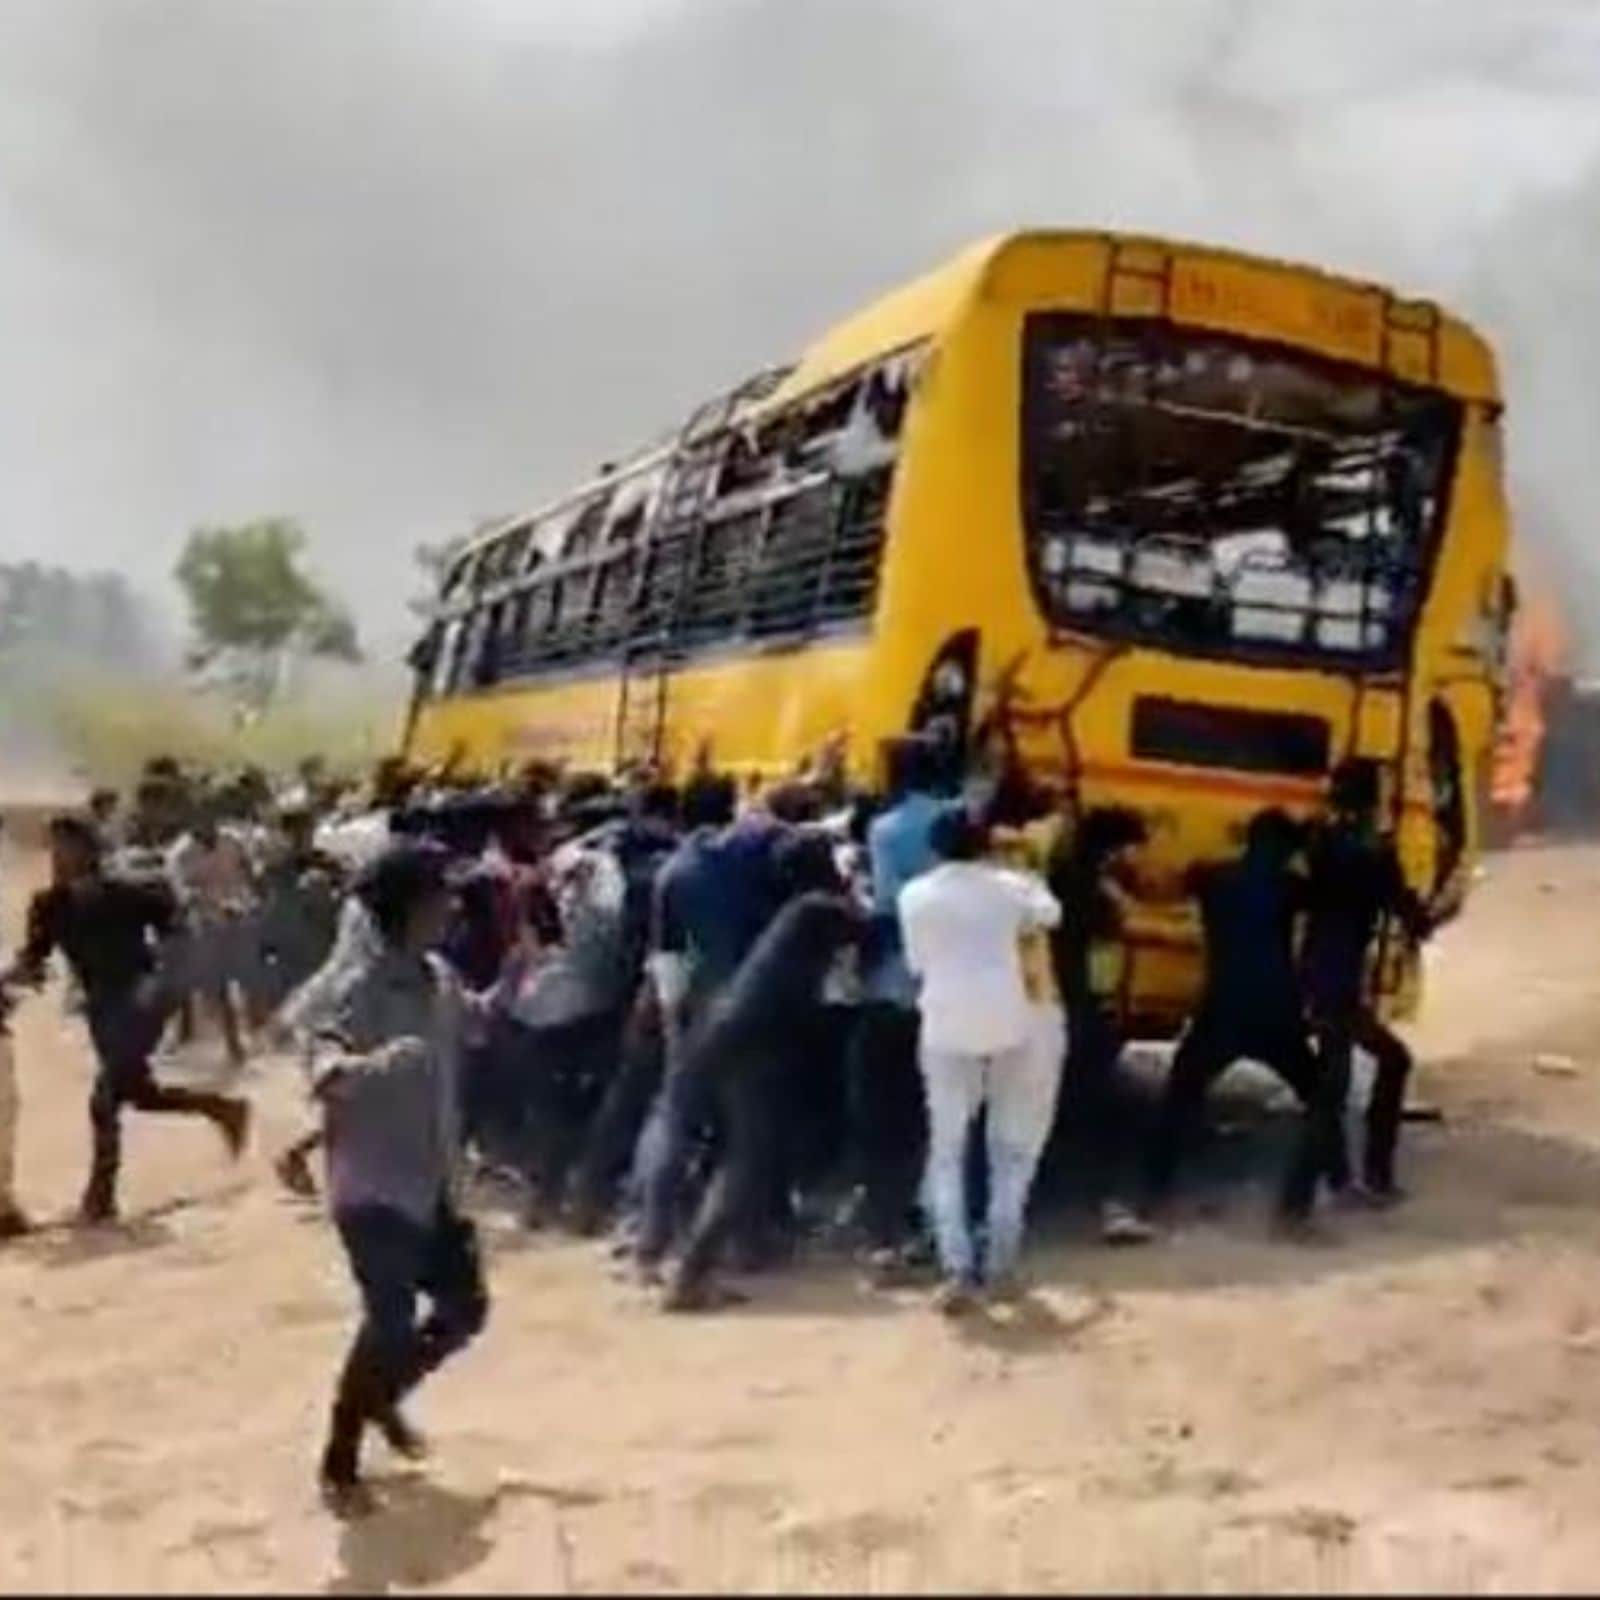 Buss School Girl Badmasti - Tamil Nadu Student Death: Violence Breaks Out as Hundreds Storm into School,  Ignite Bus; Police Open Fire in Air - News18